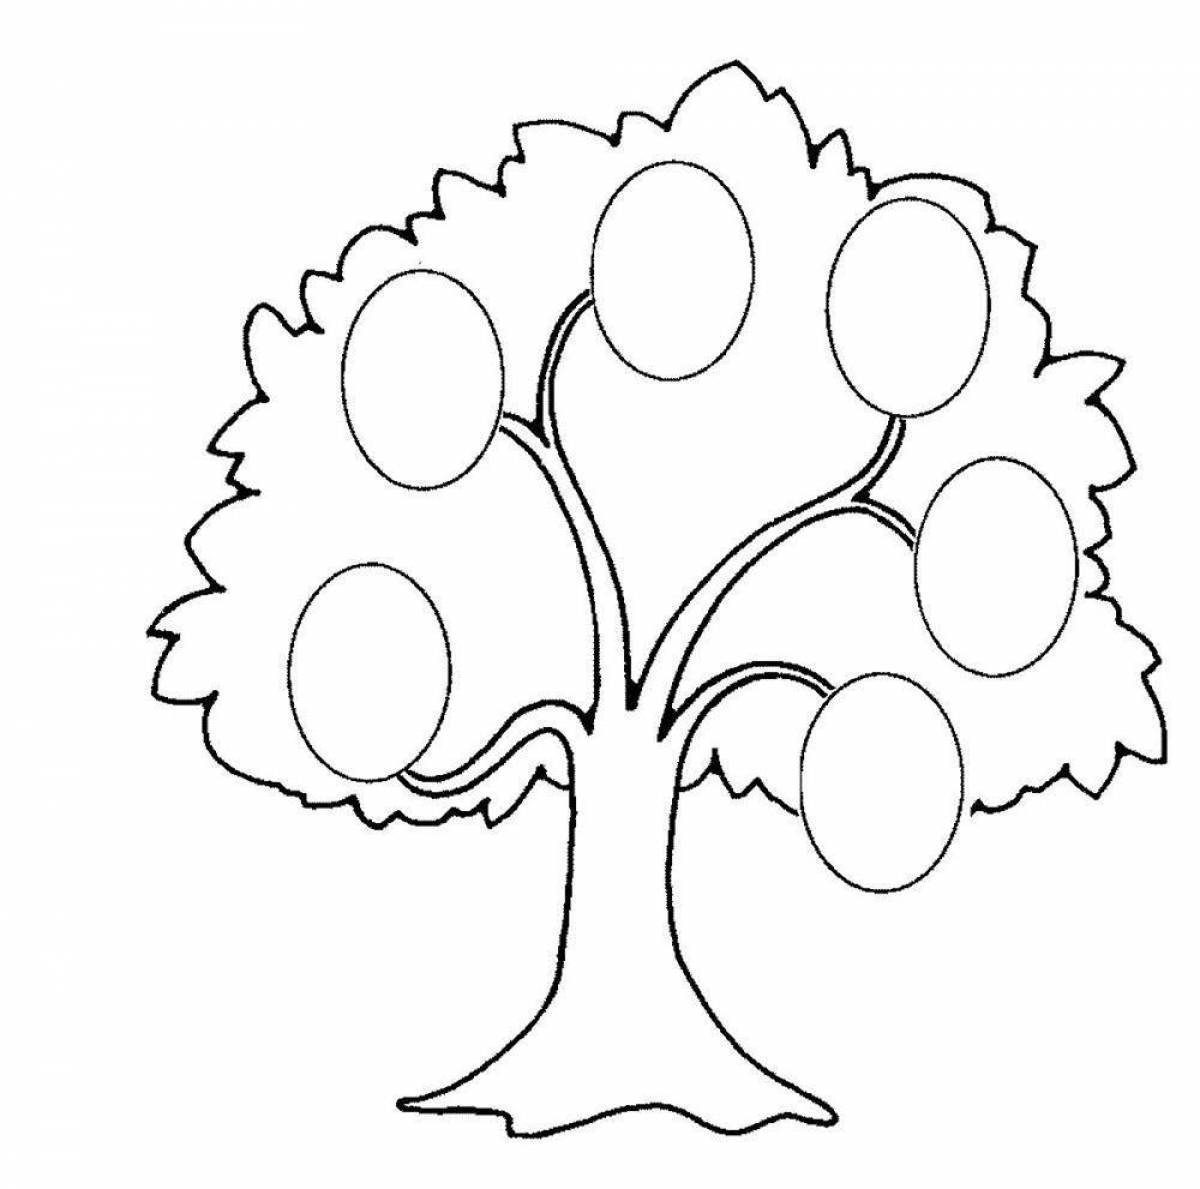 Playful tree coloring for 2-3 year olds